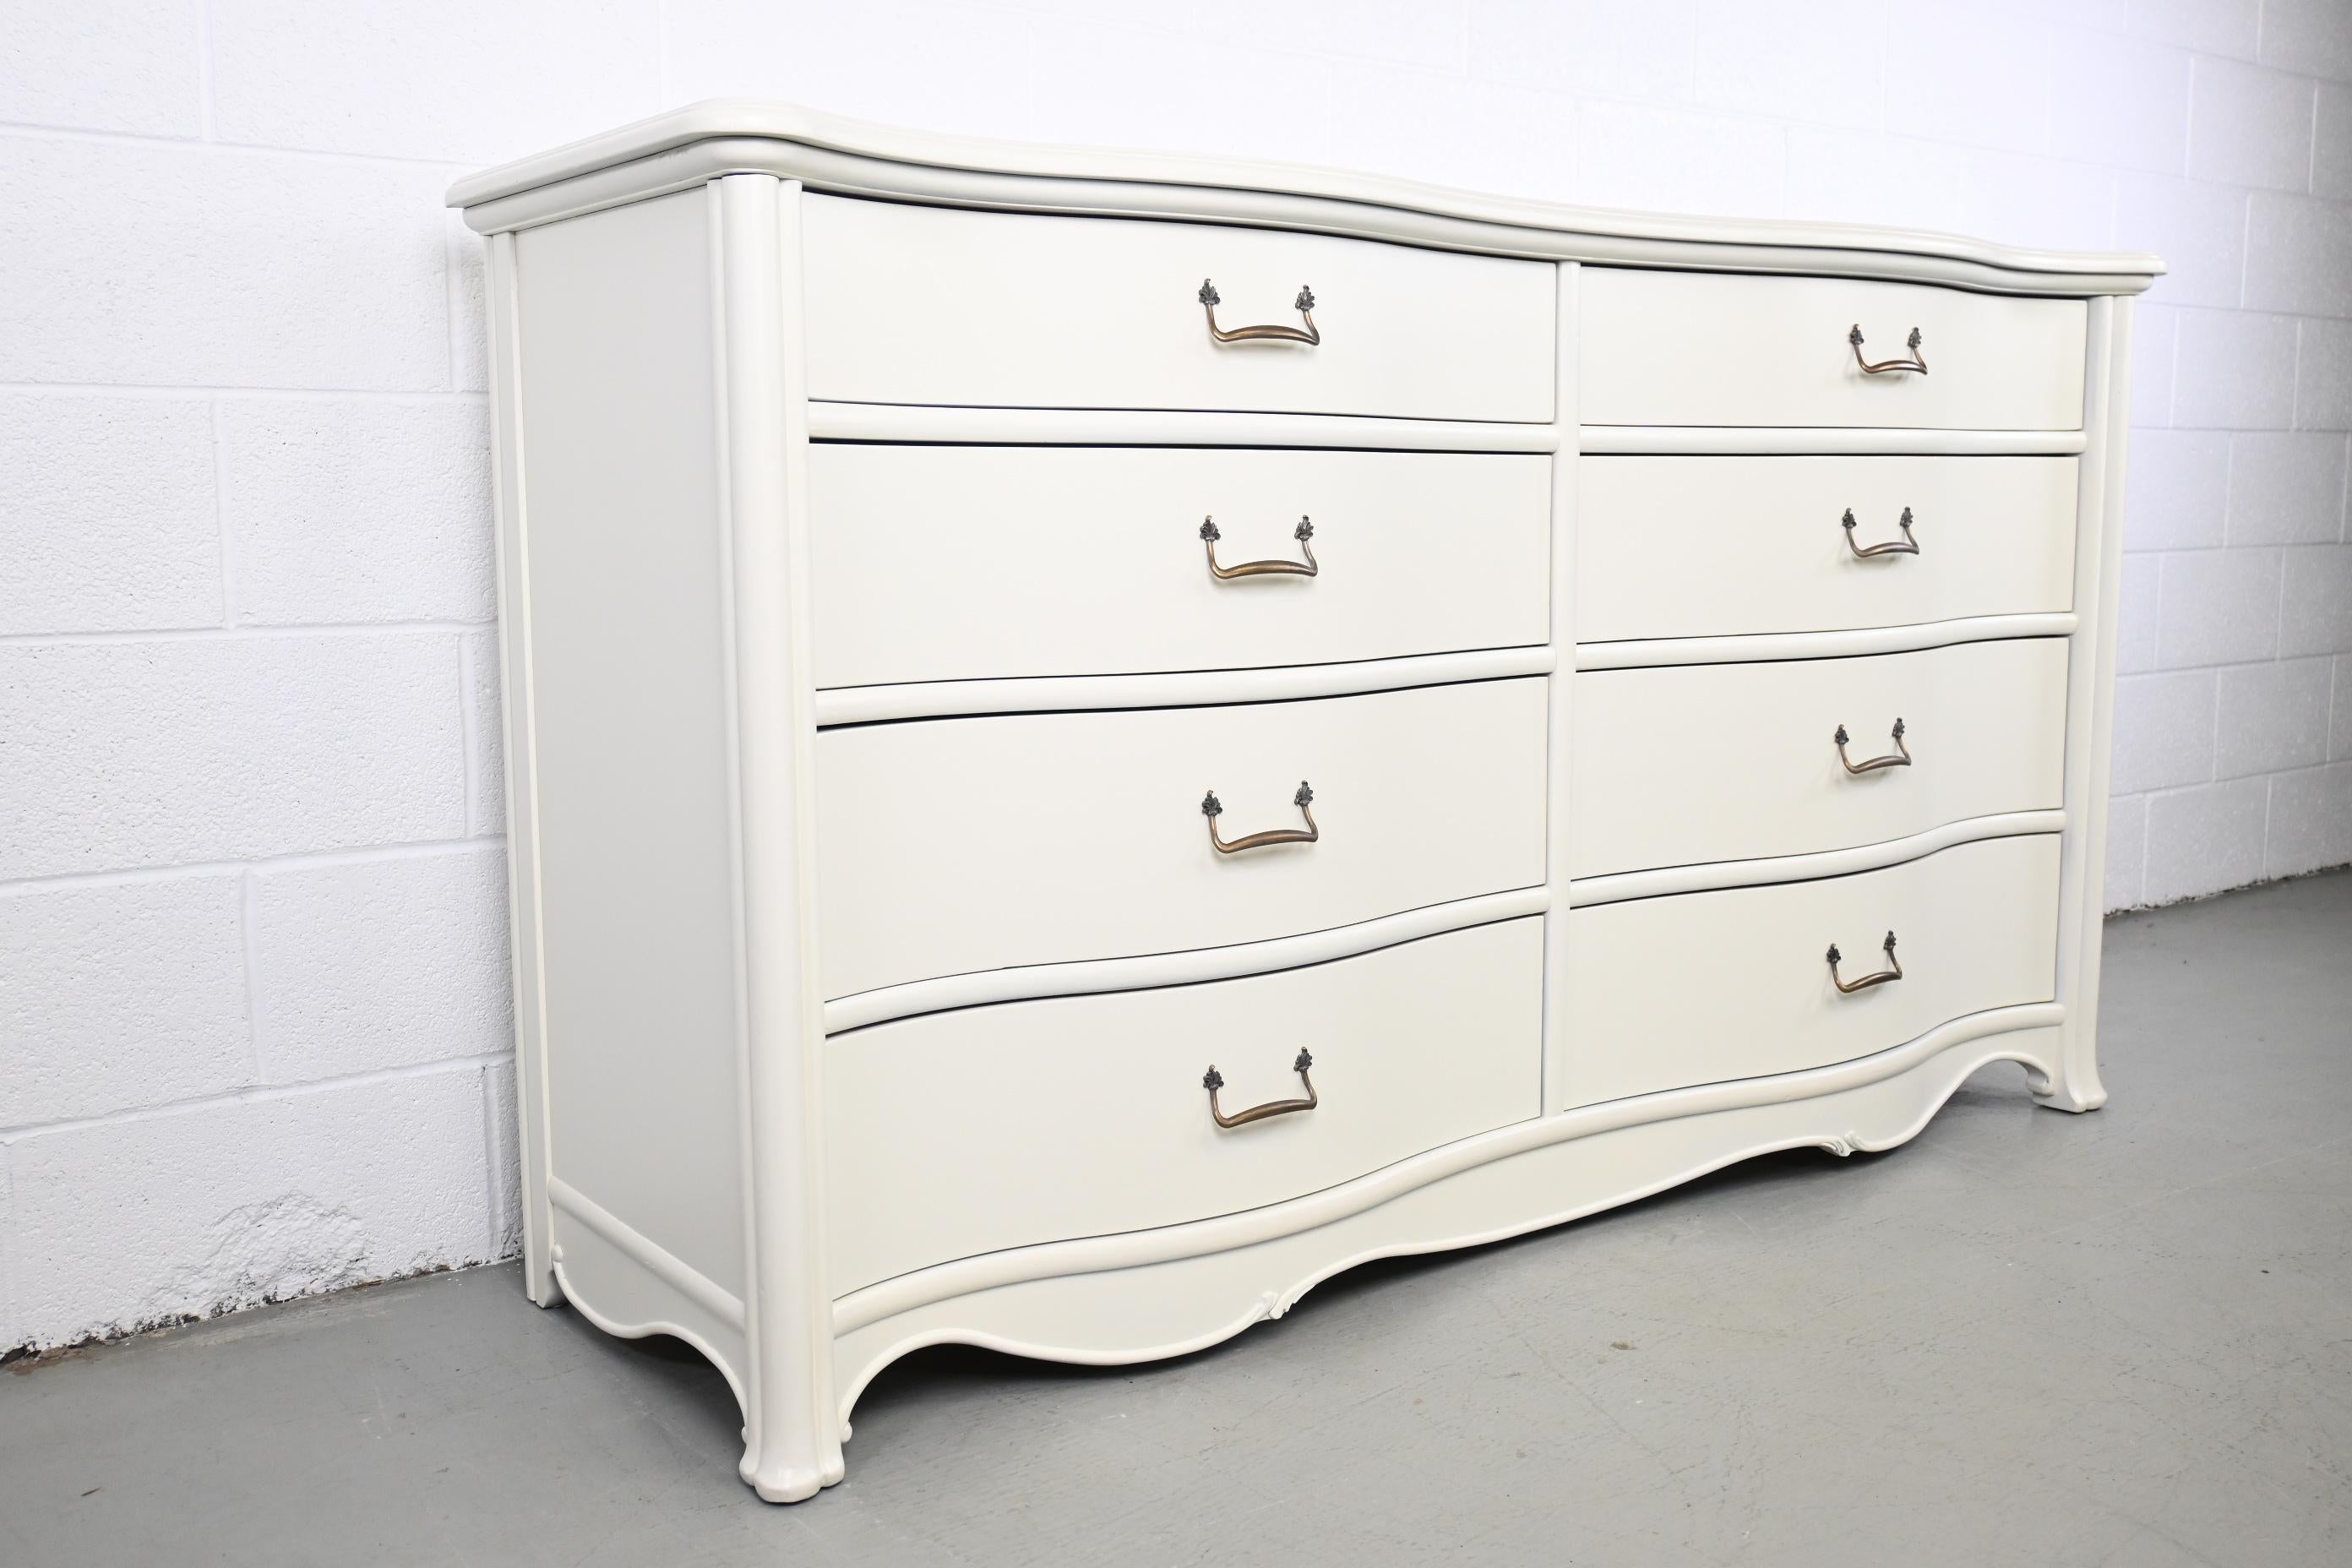 Drexel Heritage Furniture contemporary ivory lacquered eight drawer dresser

Drexel Heritage, 2010s

Measures: 70.5 Wide x 21 Deep x 39 High.

Ivory lacquered eight drawer contemporary dresser with mildly purposeful distressed